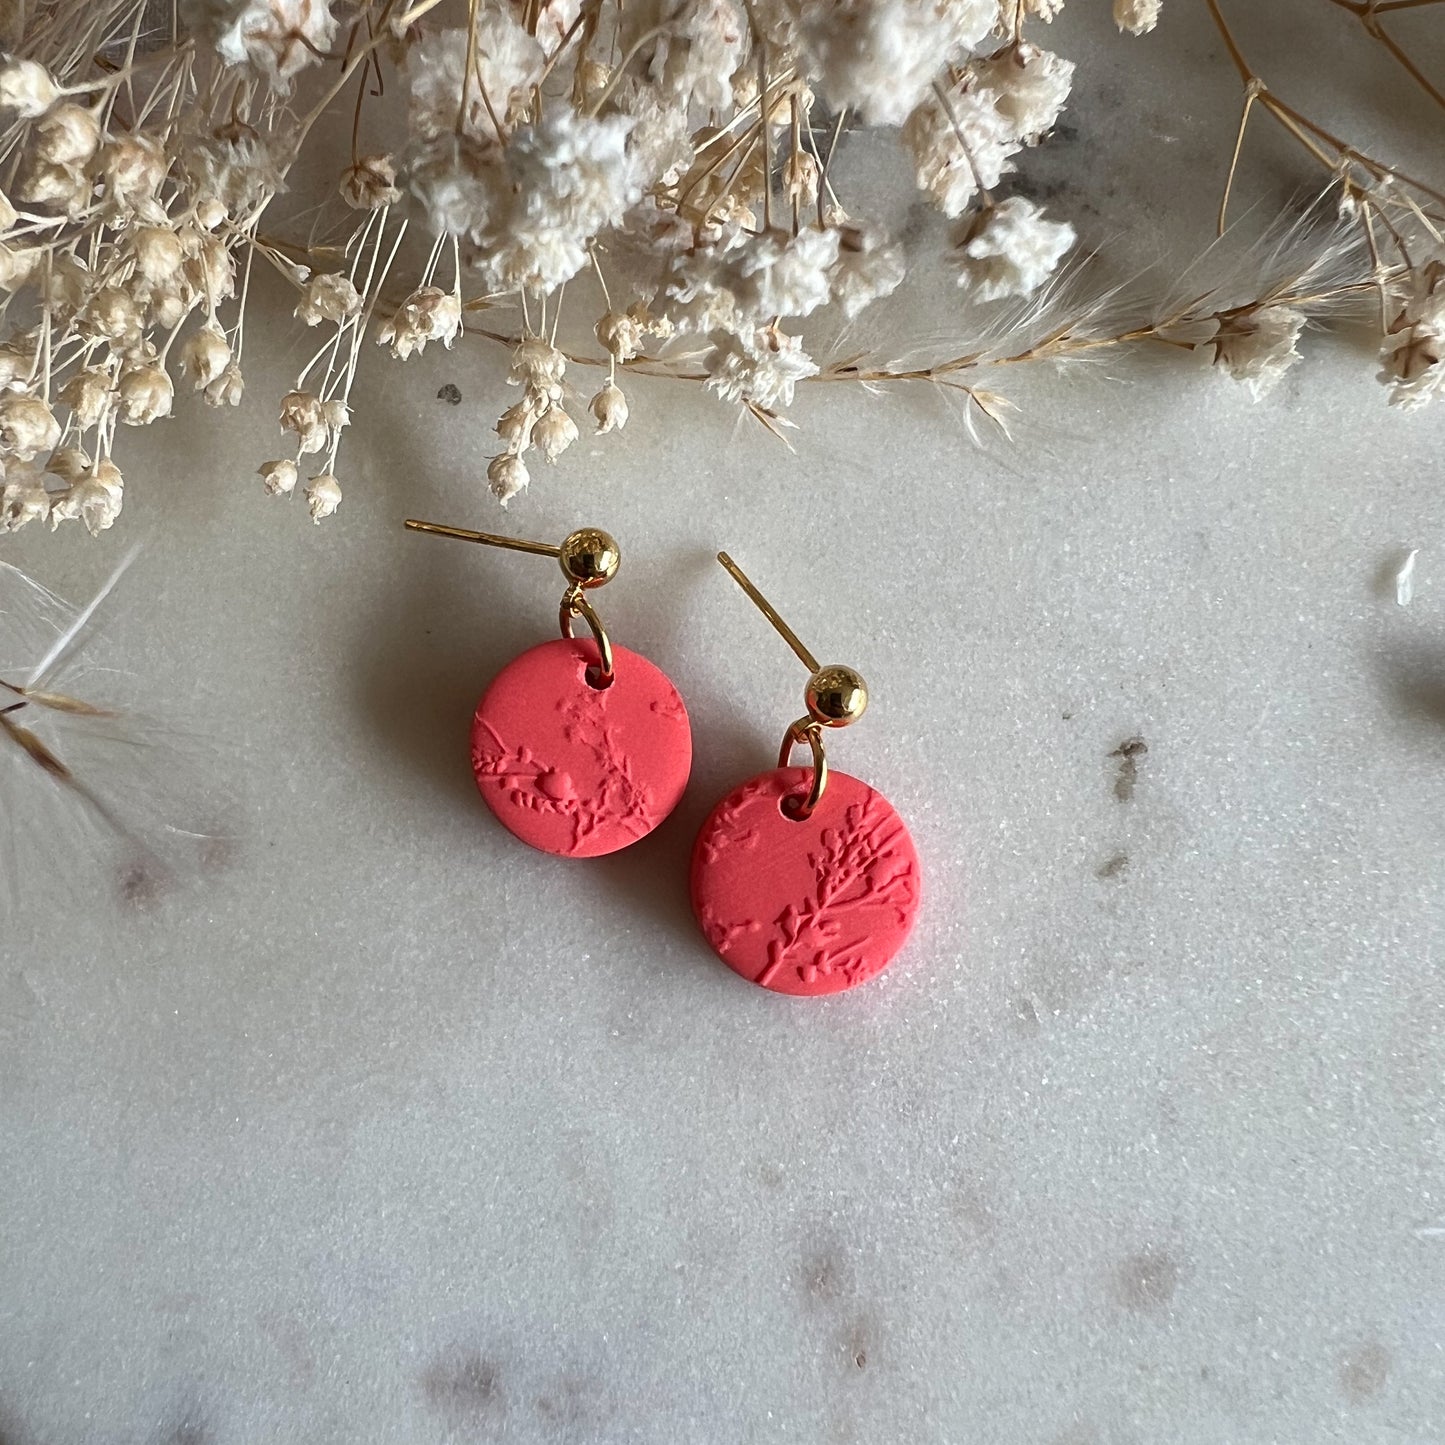 ROUND | round stud drop earrings in blossom textured bright coral red